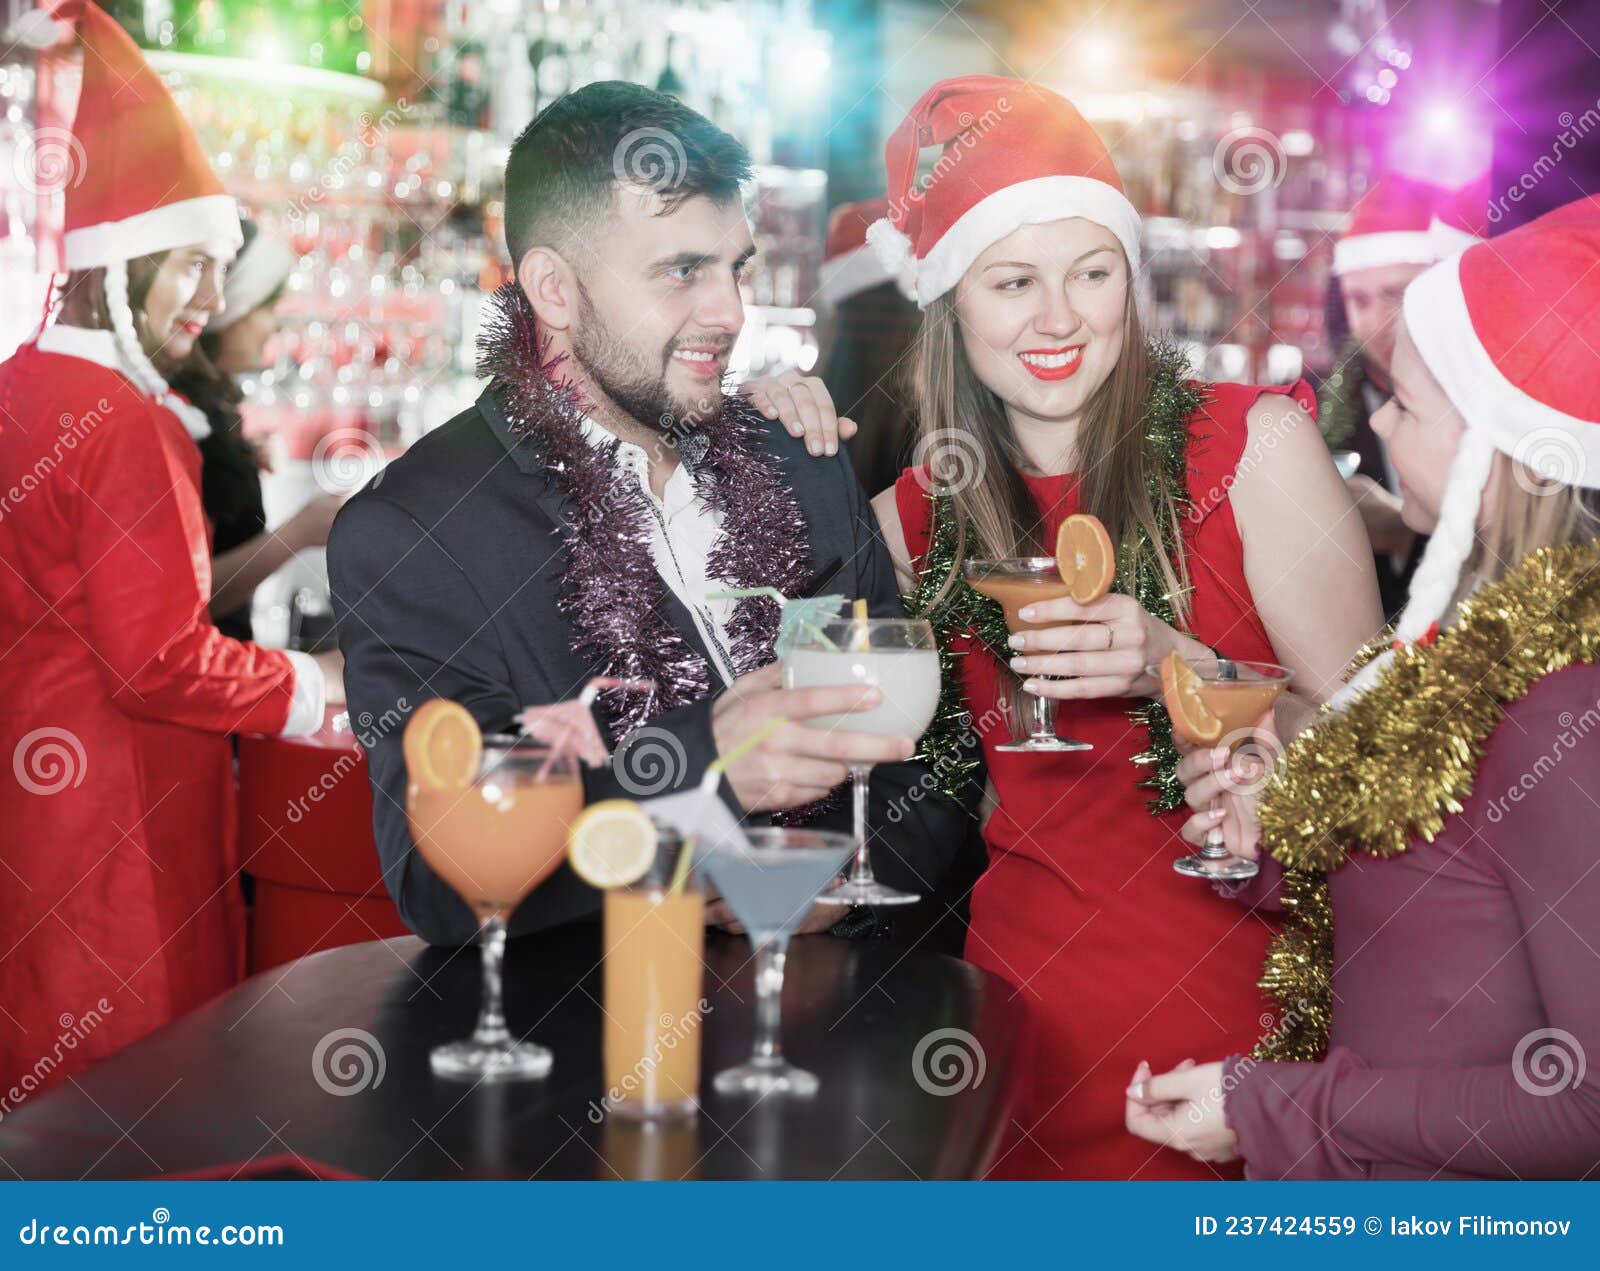 Guy With Girls On New Year Eve Party In Bar Stock Image Image Of Amicable Indoors 237424559